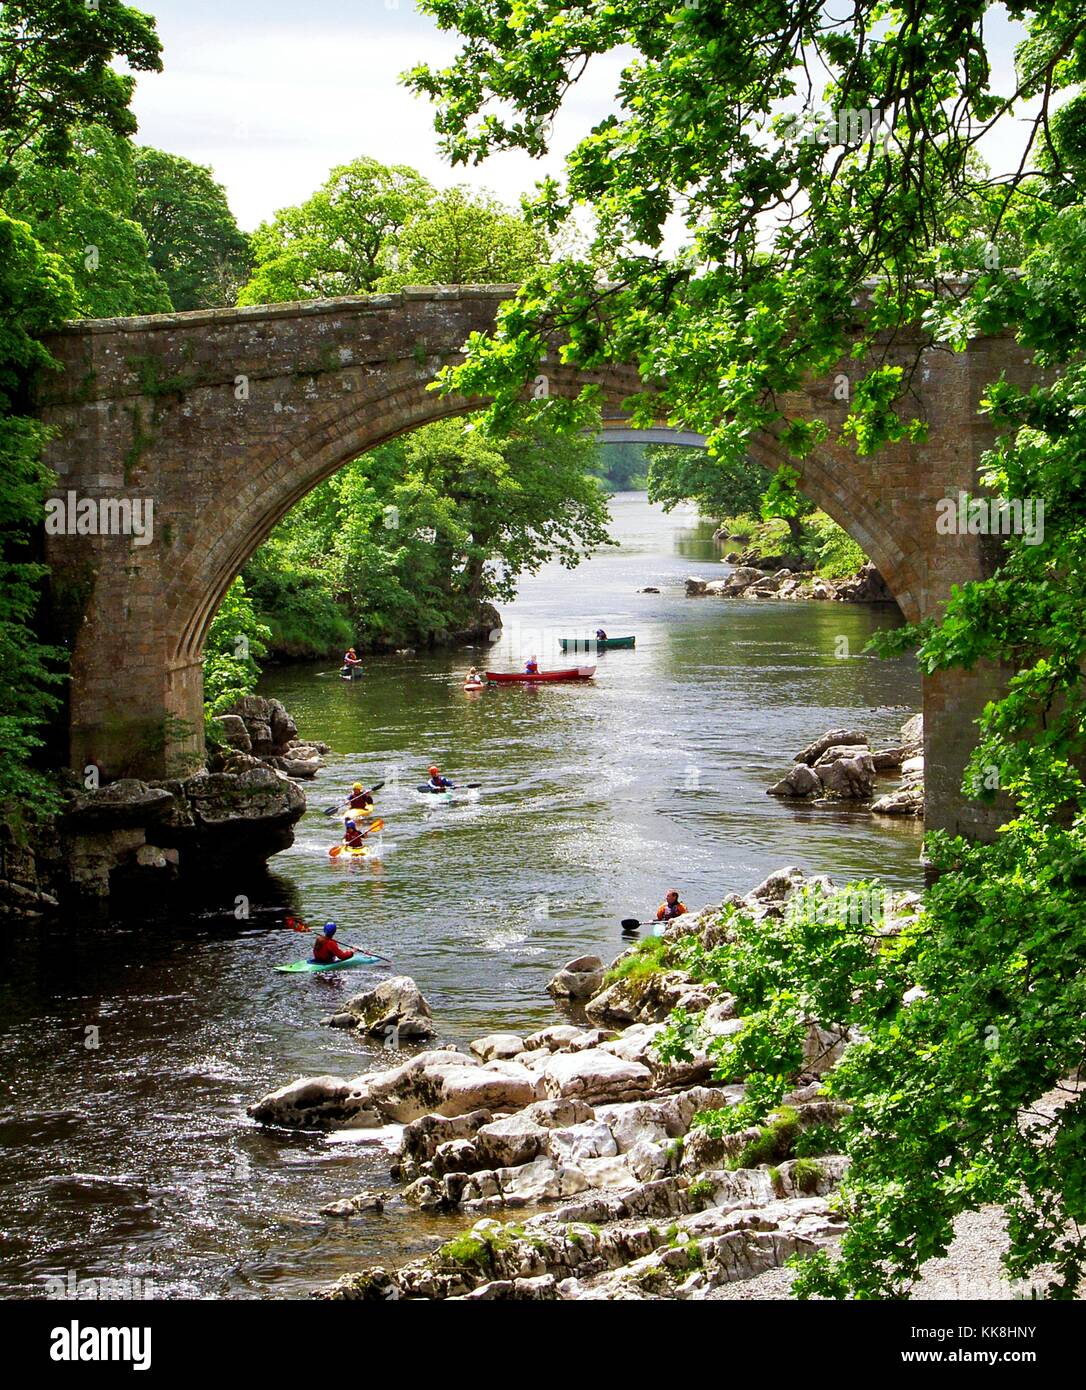 The Devils Bridge over the River Lune at the town of Kirkby Lonsdale, Cumbria. Canoeing, kayaking. England. Stock Photo